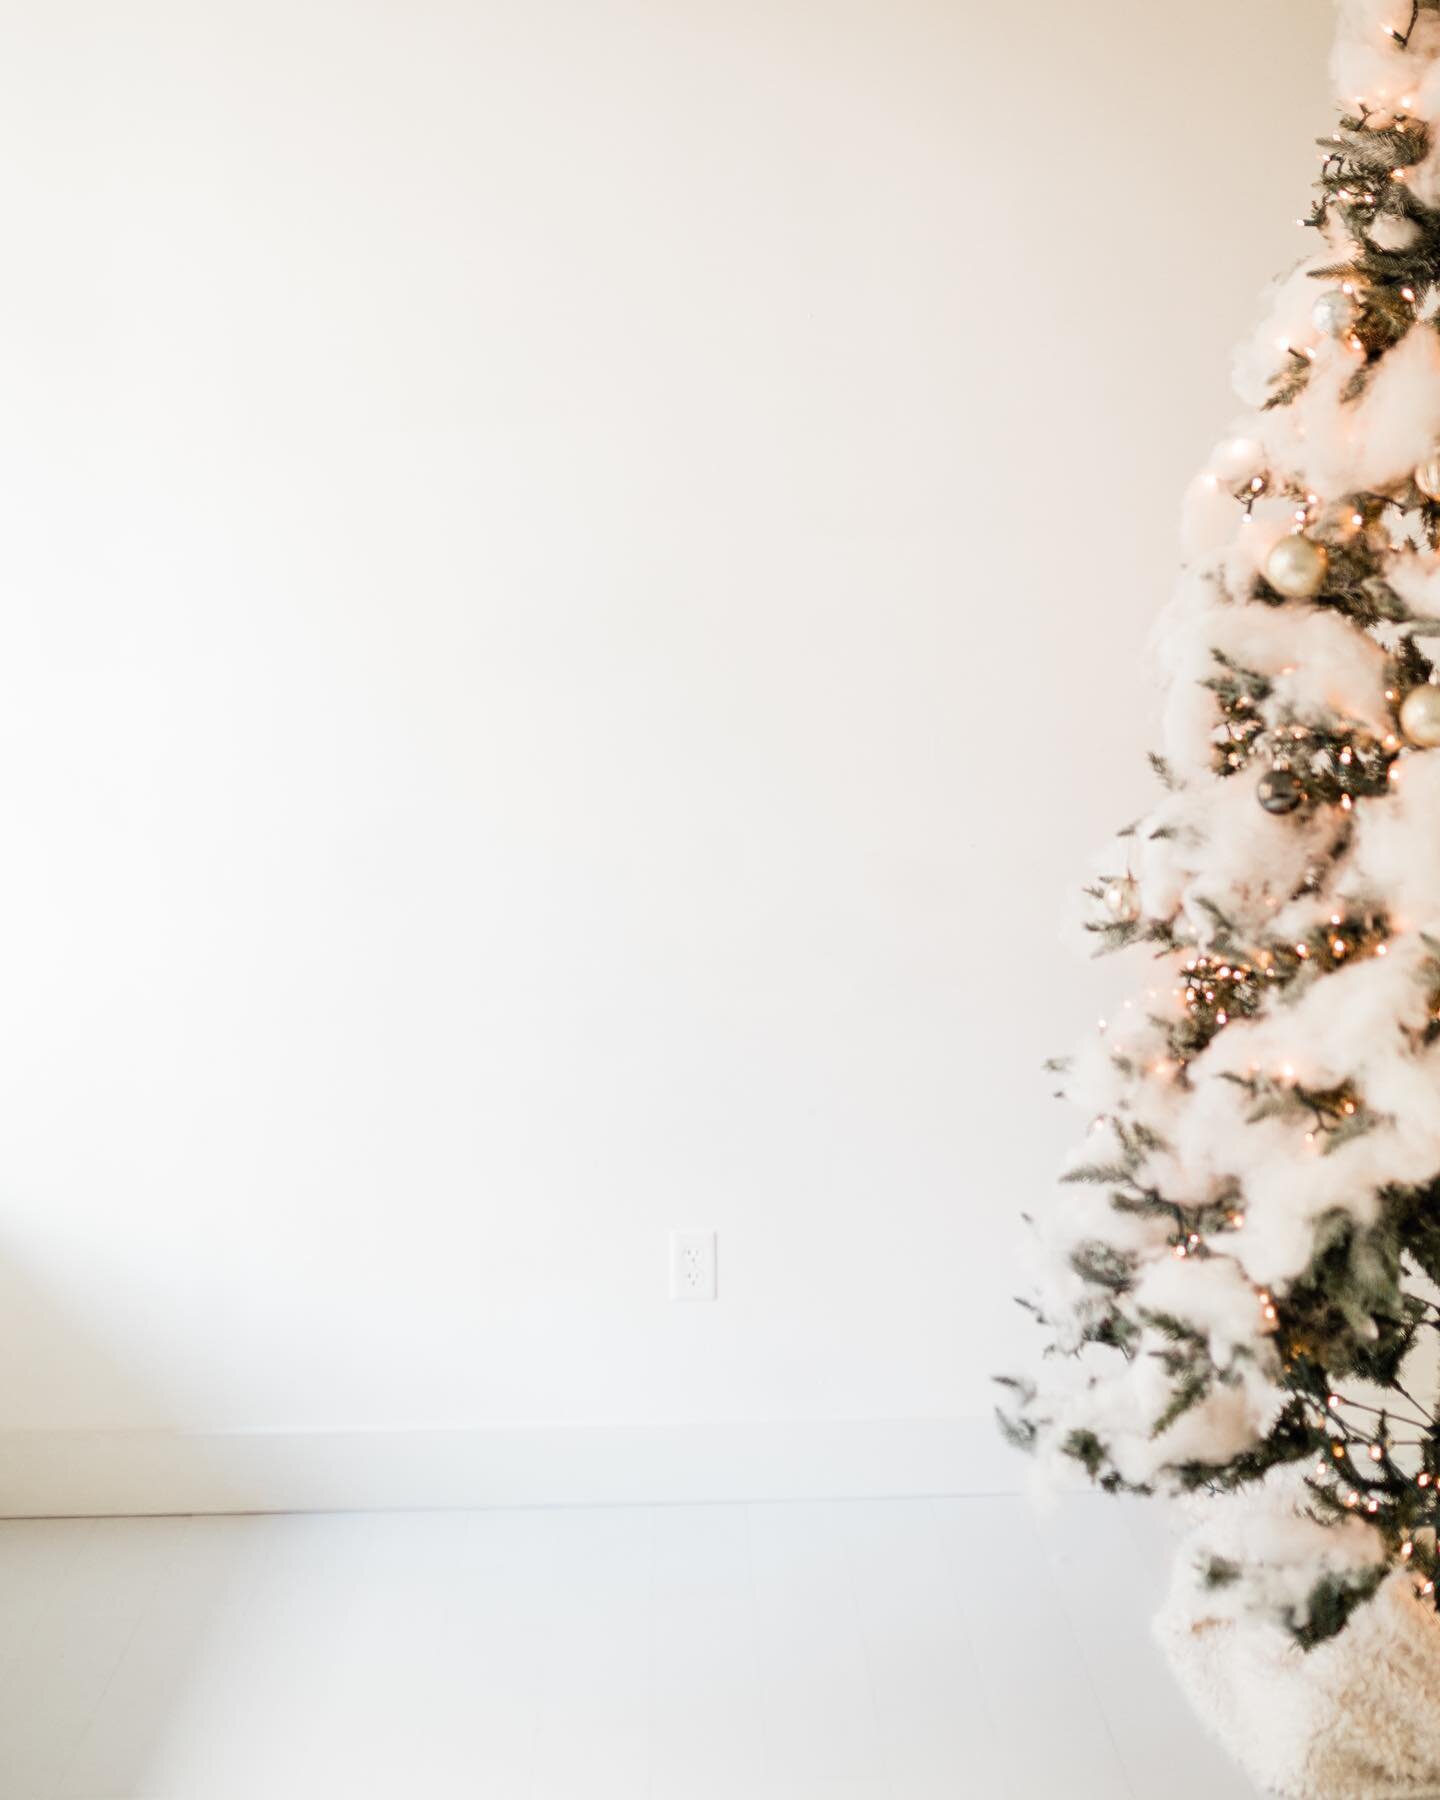 Our white studio now has a 9ft, snowy tree, fluffy &ldquo;snow&rdquo;, extra white lights, jumbo ornaments, a beautiful wood bench, the dark blue chair (not pictured), wood ladder, etc! If you have last minute clients looking for more Christmas optio